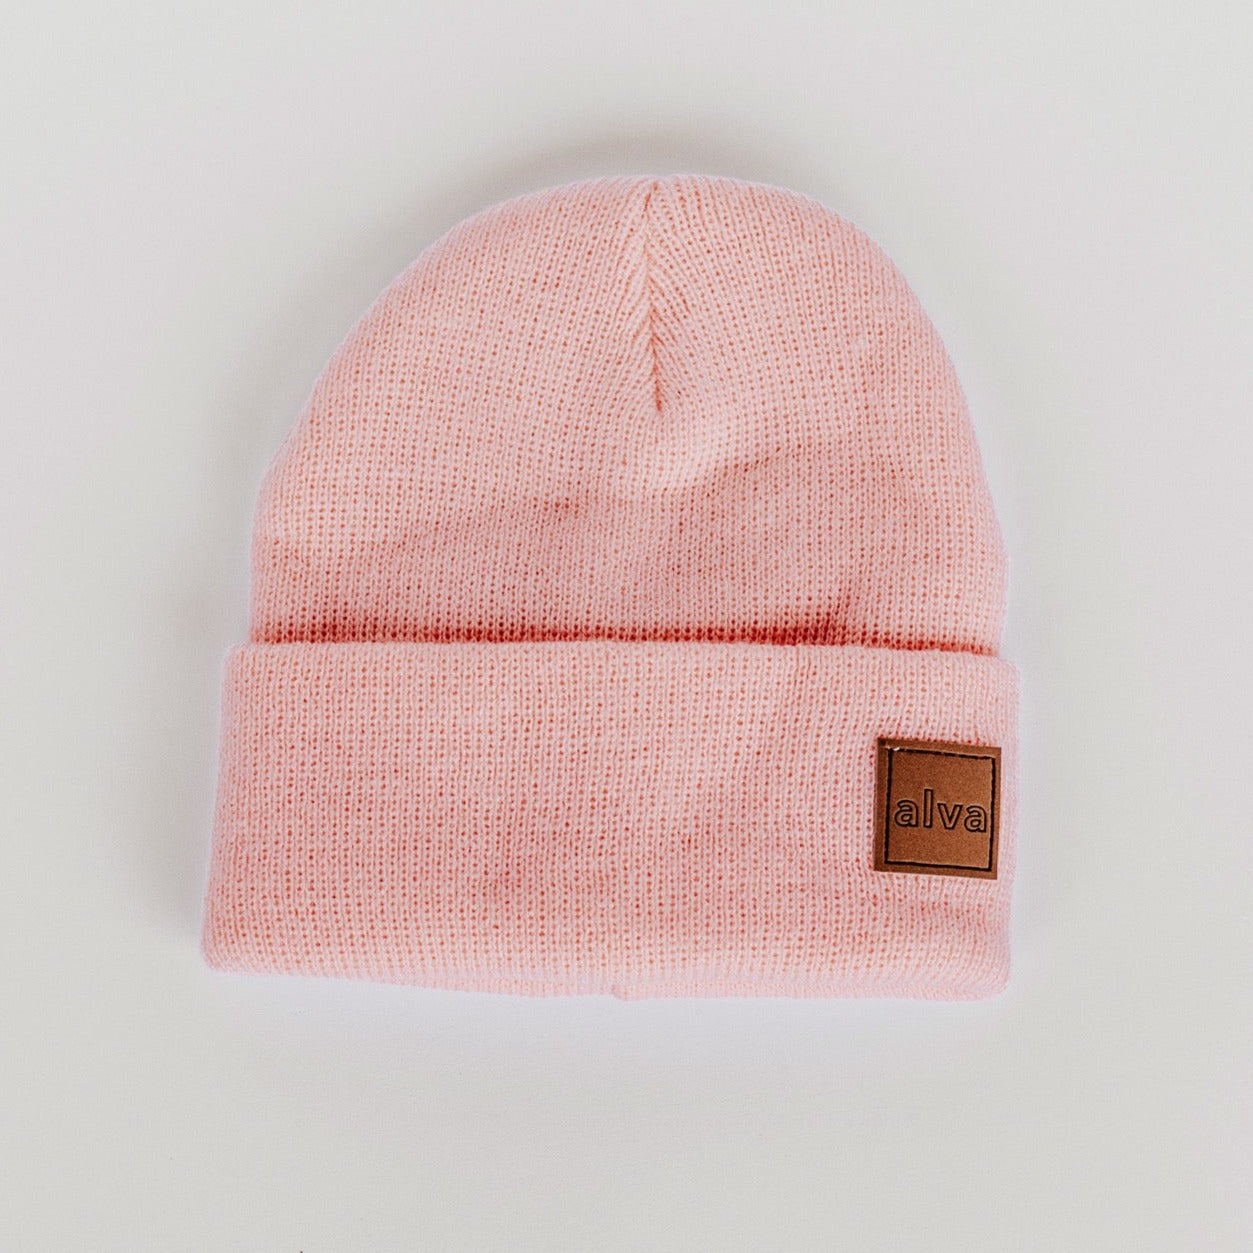 A light pink colored ribbed baby beanie with a small square faux leather patch that says &quot;alva&quot; on the bottom right corner. The hat is sitting on a white background